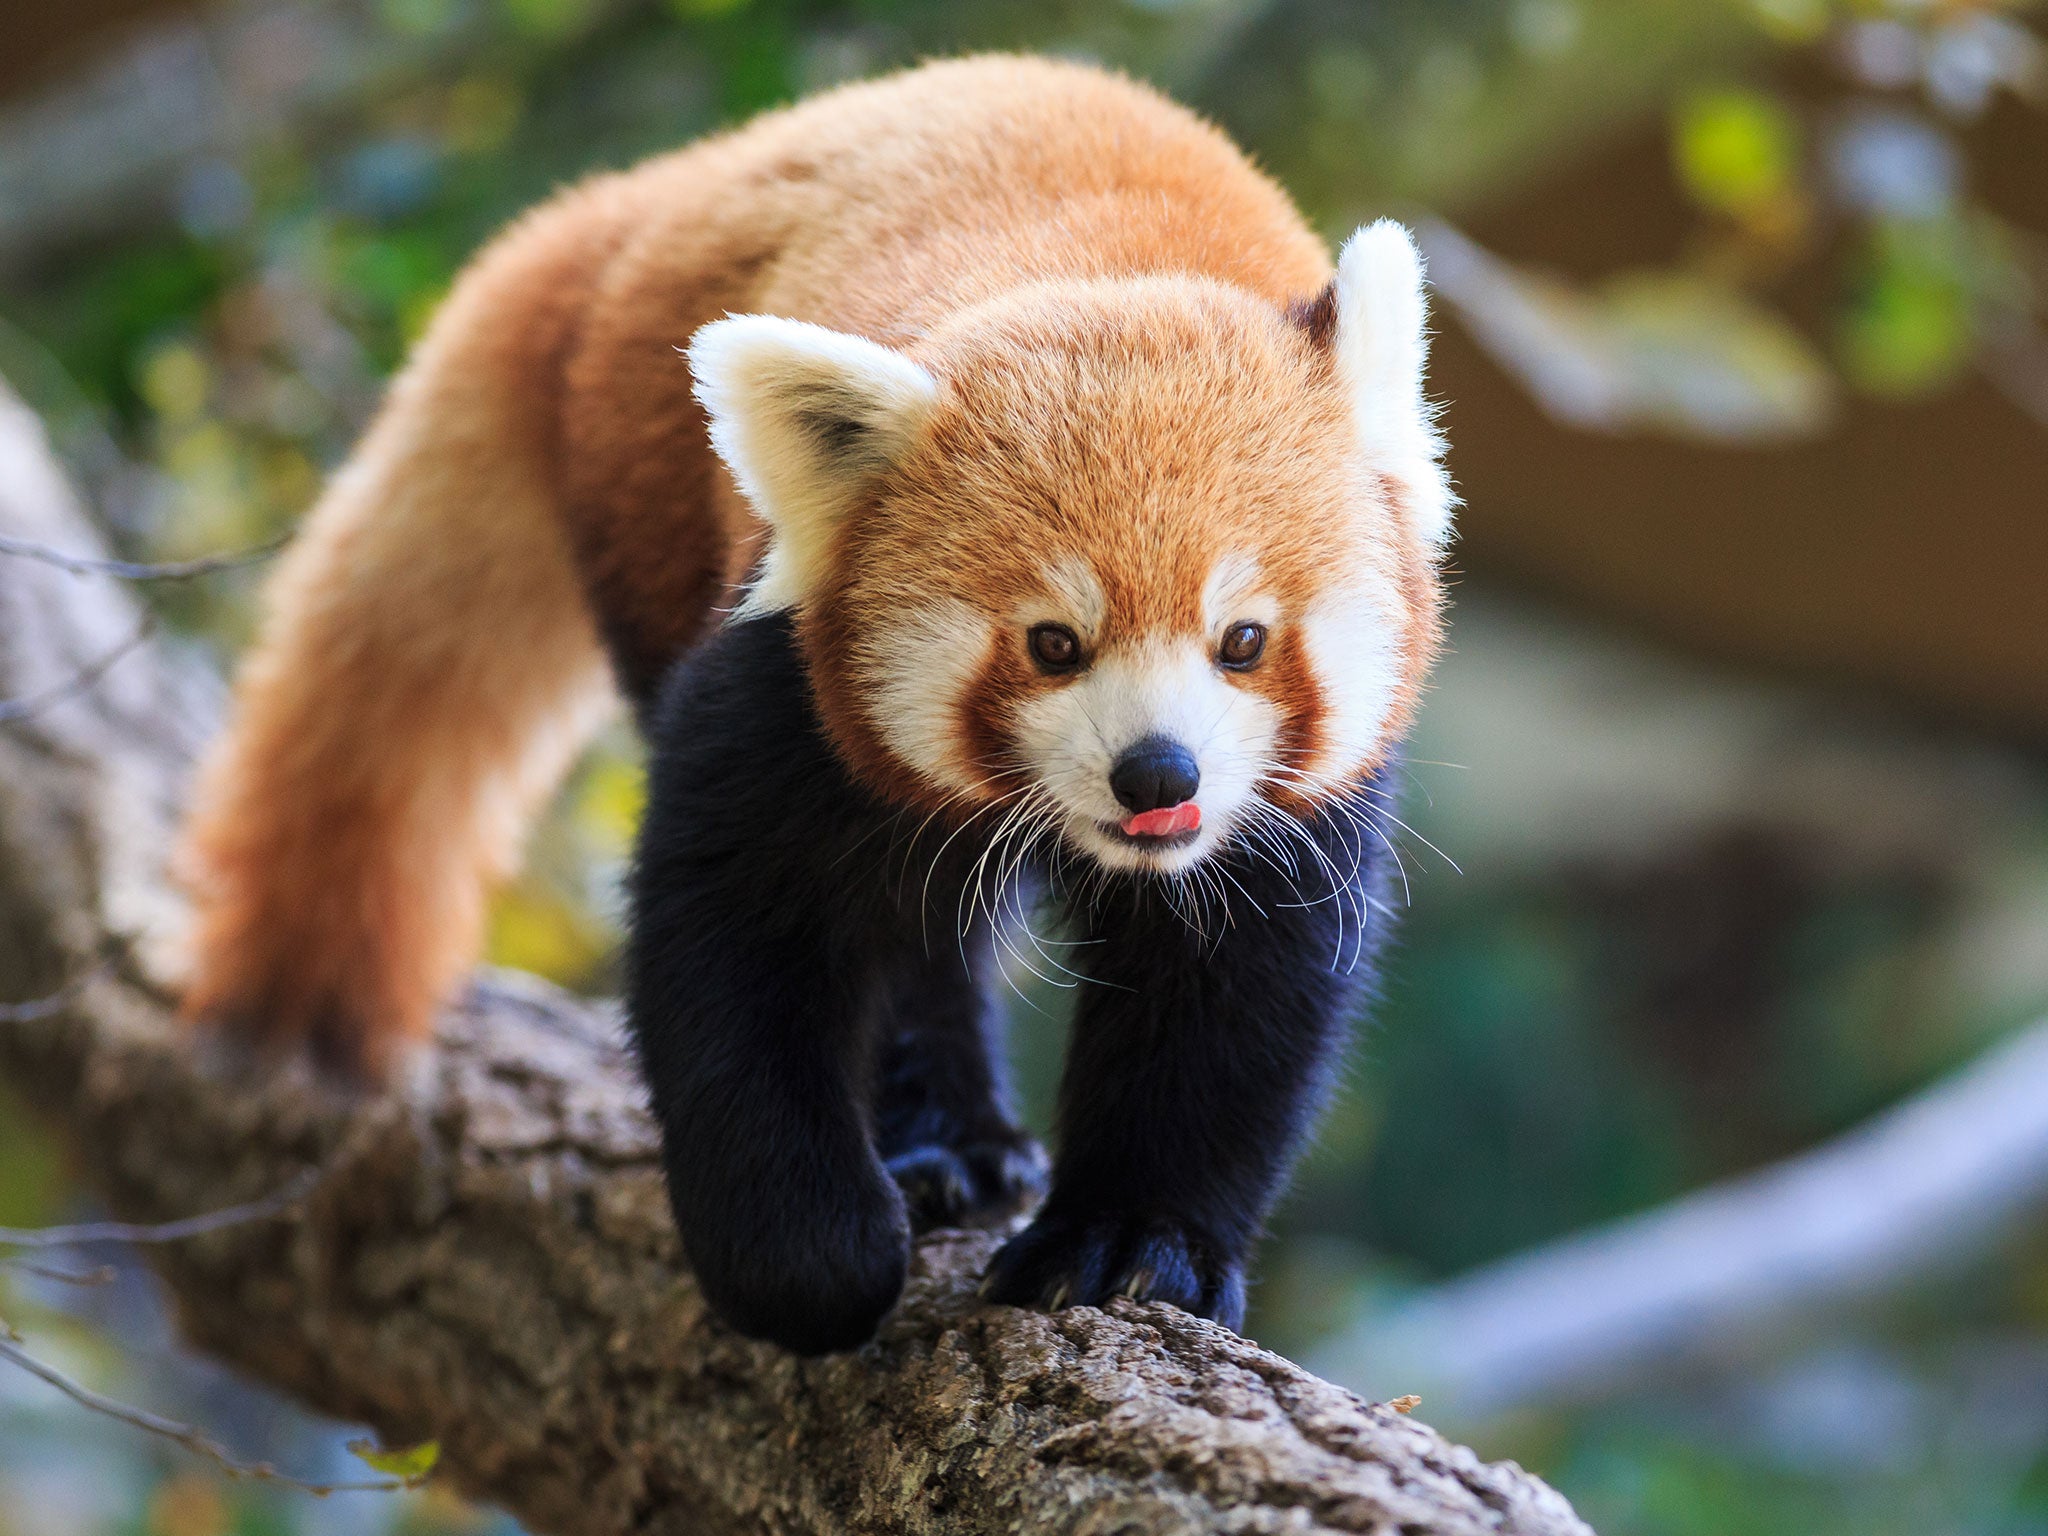 Red pandas are native to the Himalayas and southern China